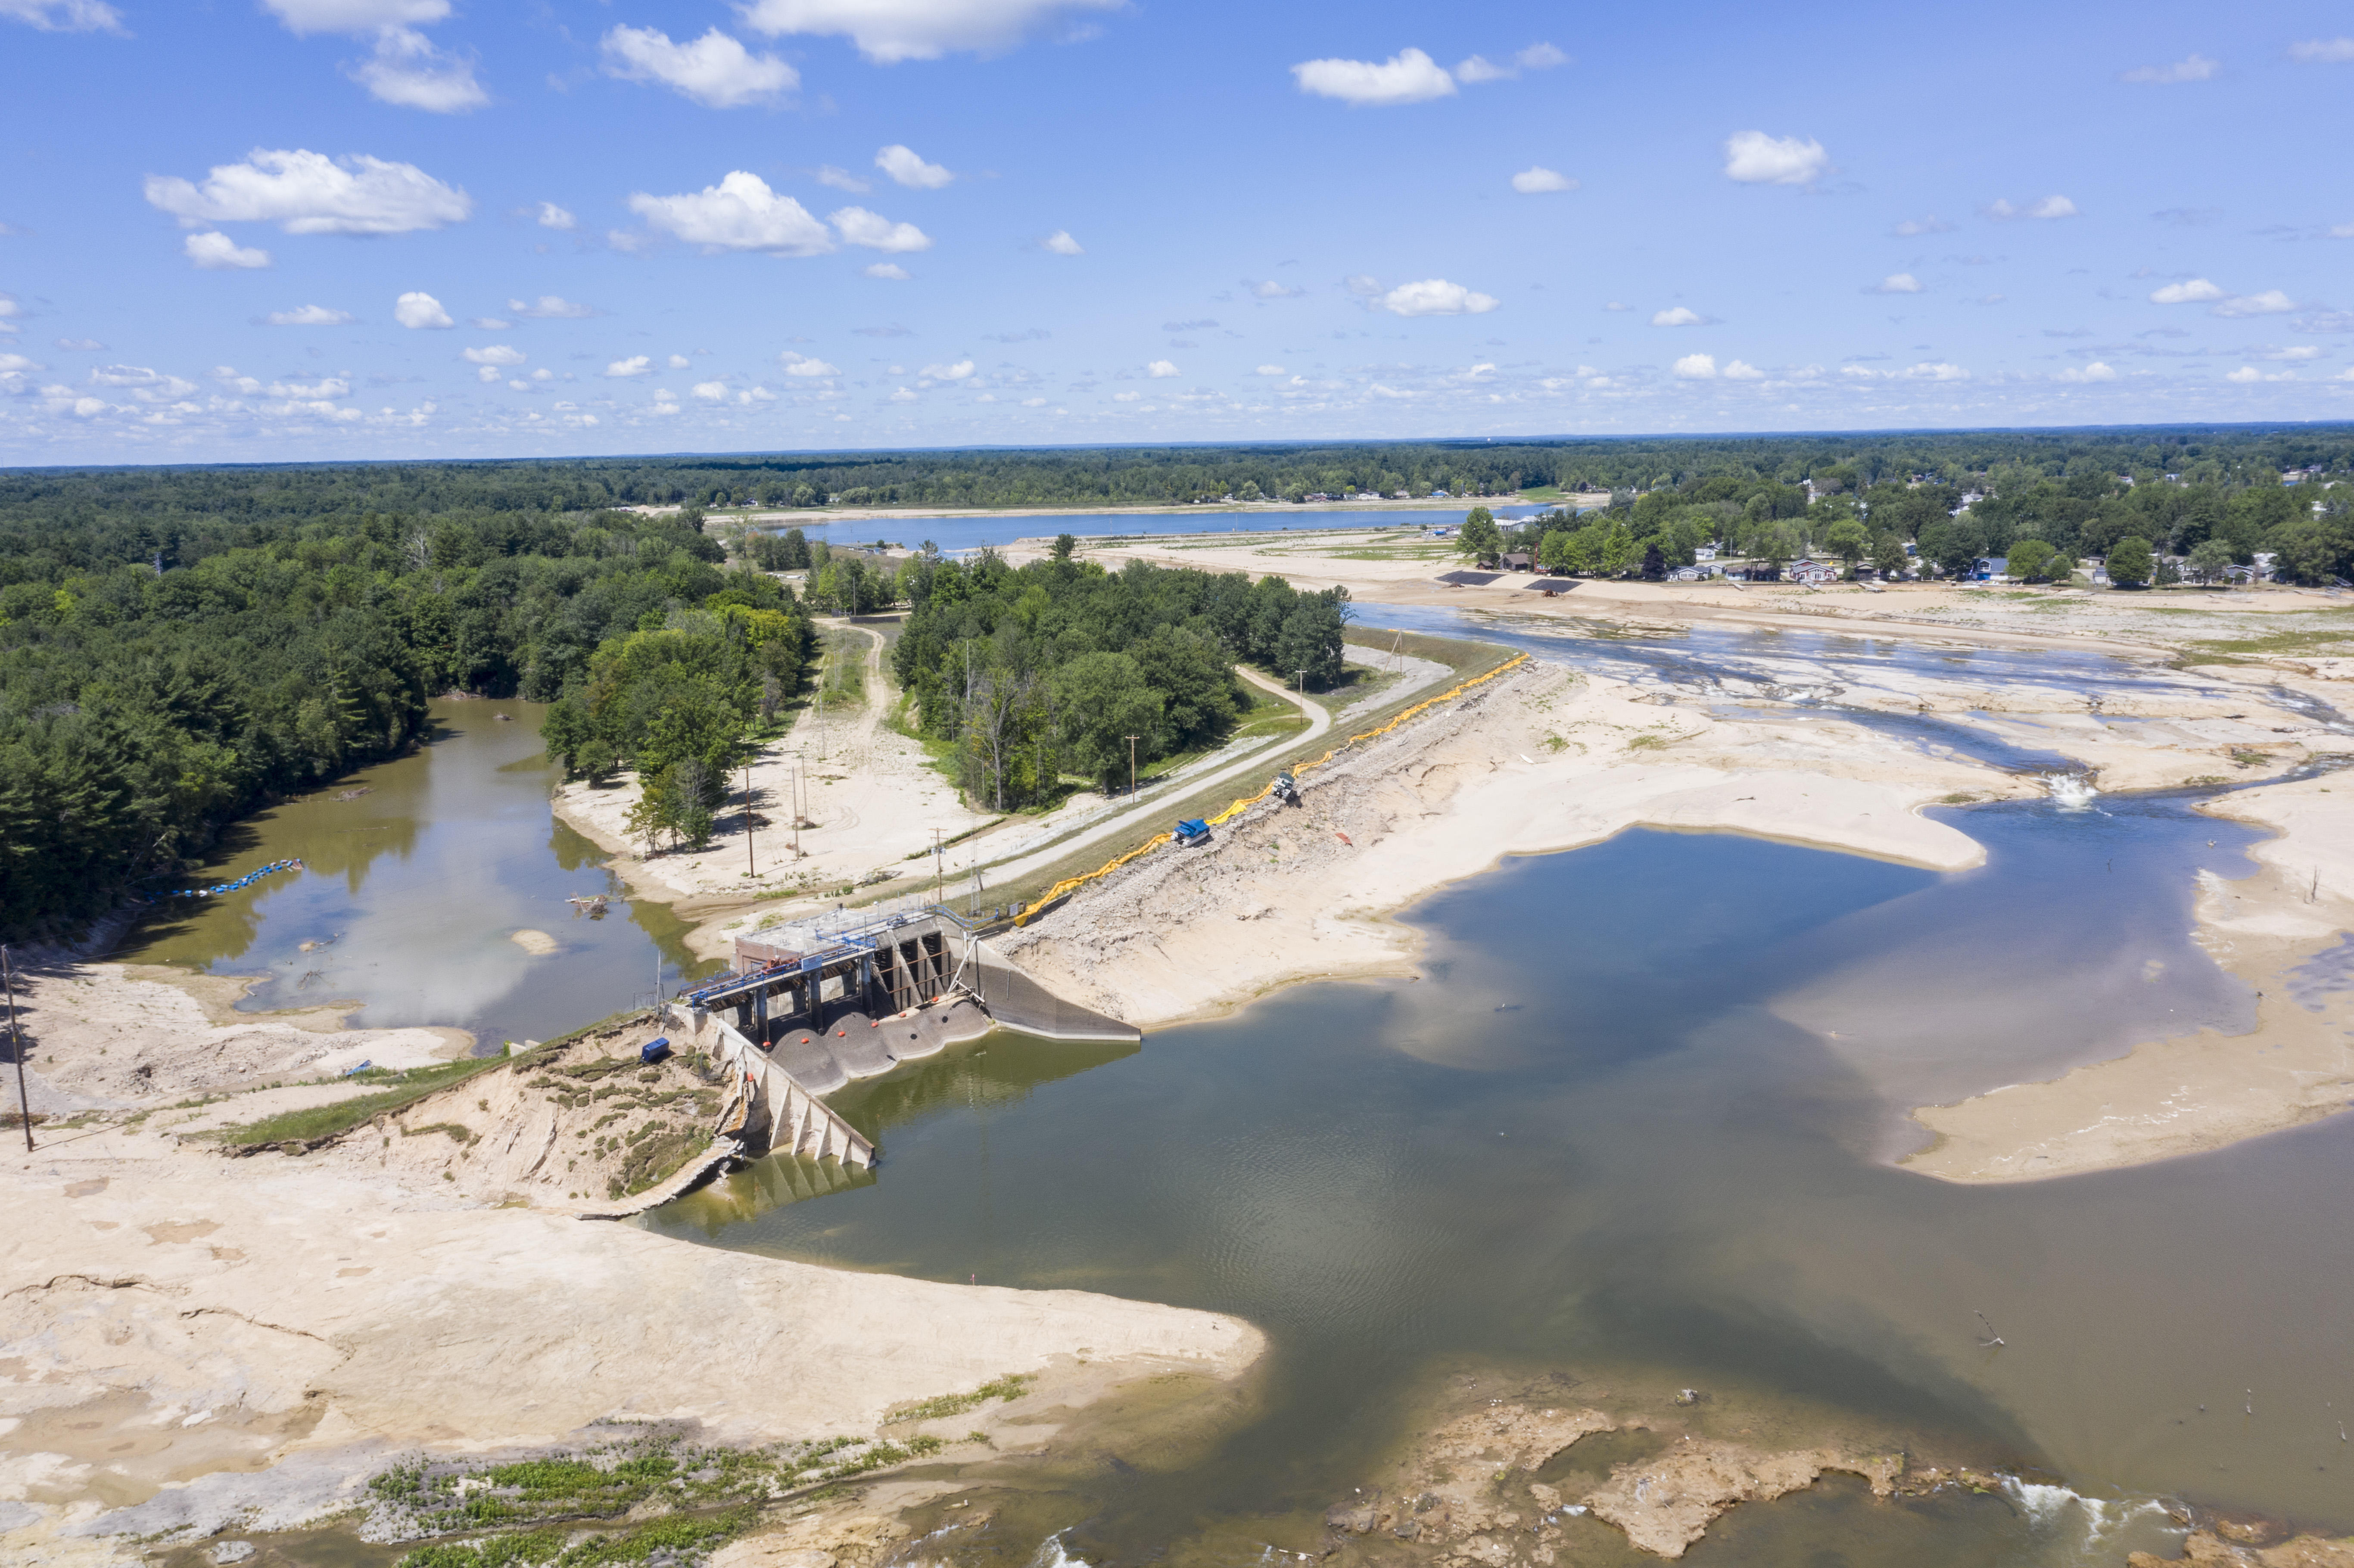 A view of the Edenville Dam in Hope on Thursday, July 30, 2020. The devastating flood in May gushed over the majority of land in this area. (Kaytie Boomer | MLive.com)